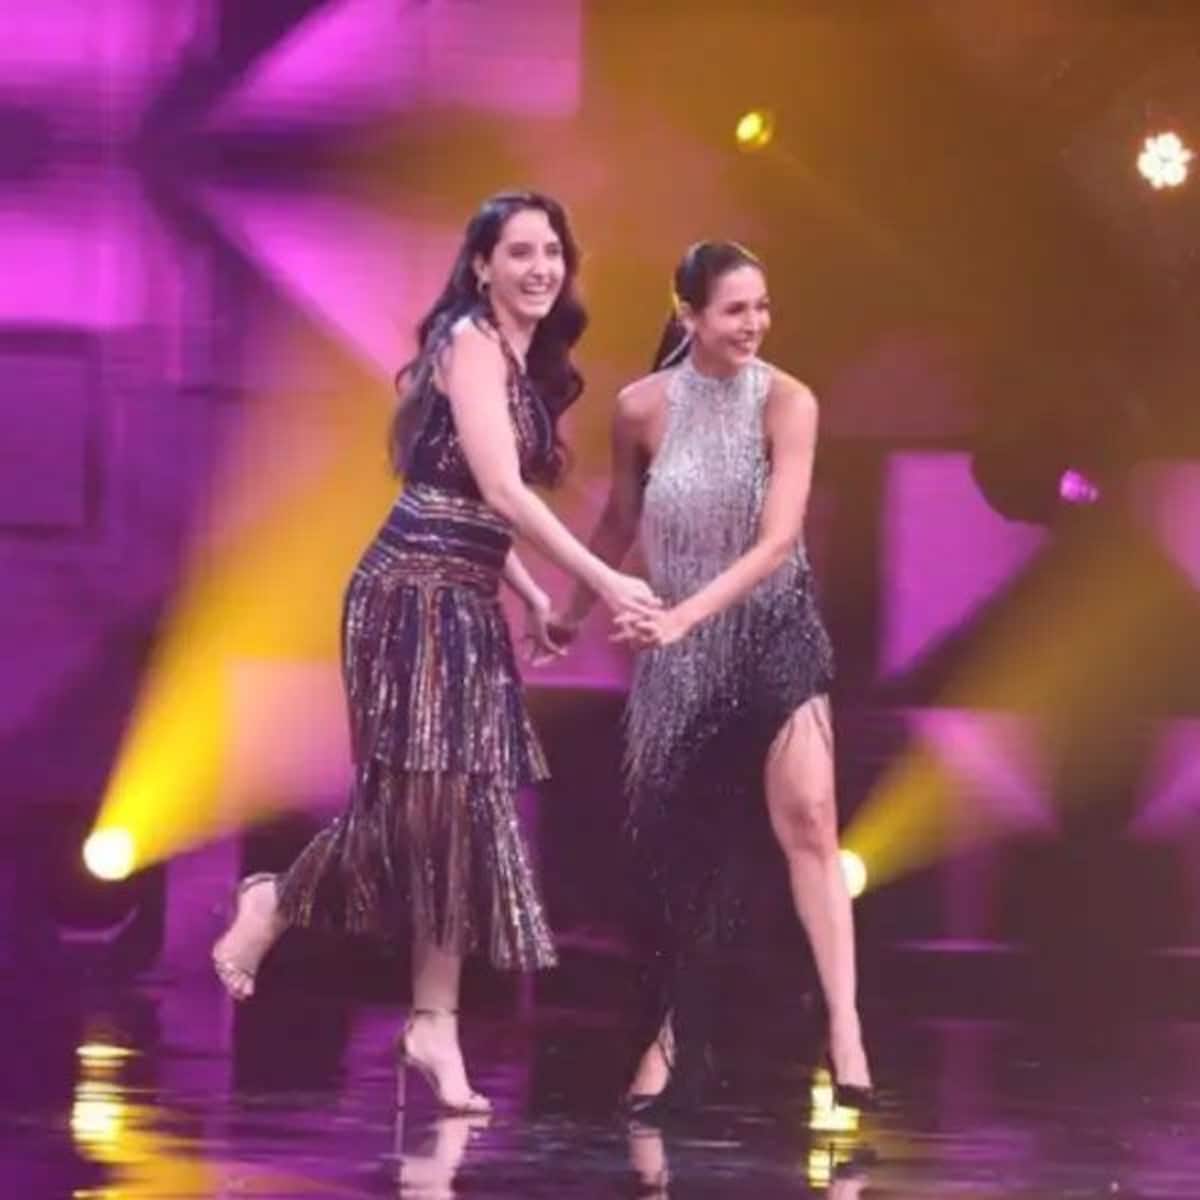 India's Best Dancer: Nora Fatehi and Malaika Arora's sizzling HAWT dance  moves set the stage on fire